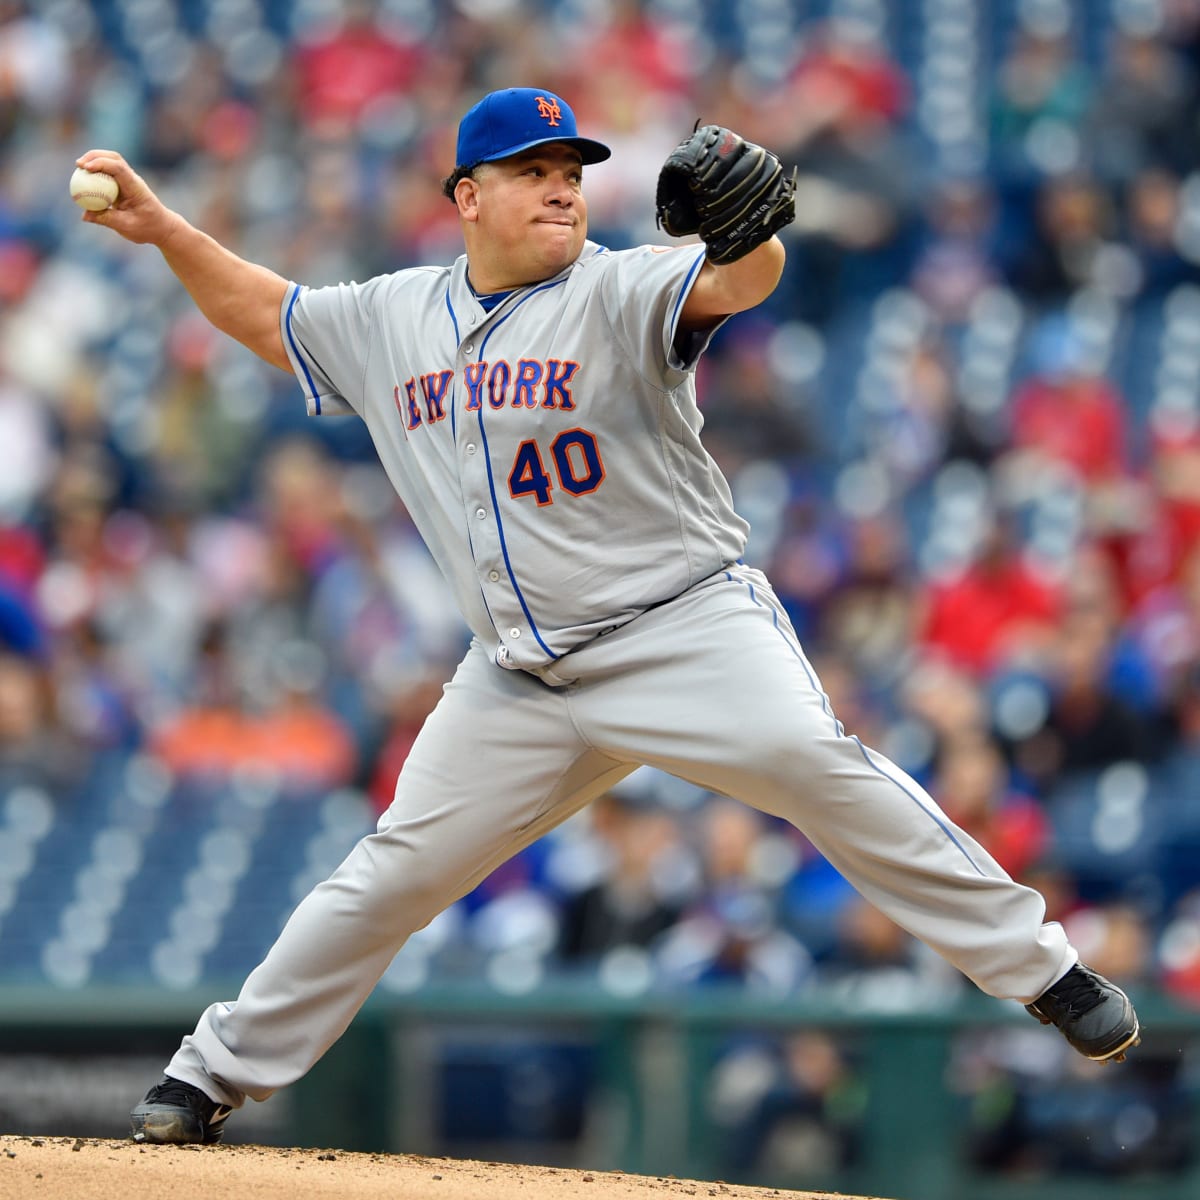 Former Mets pitcher Bartolo Colon isn't ready to retire yet